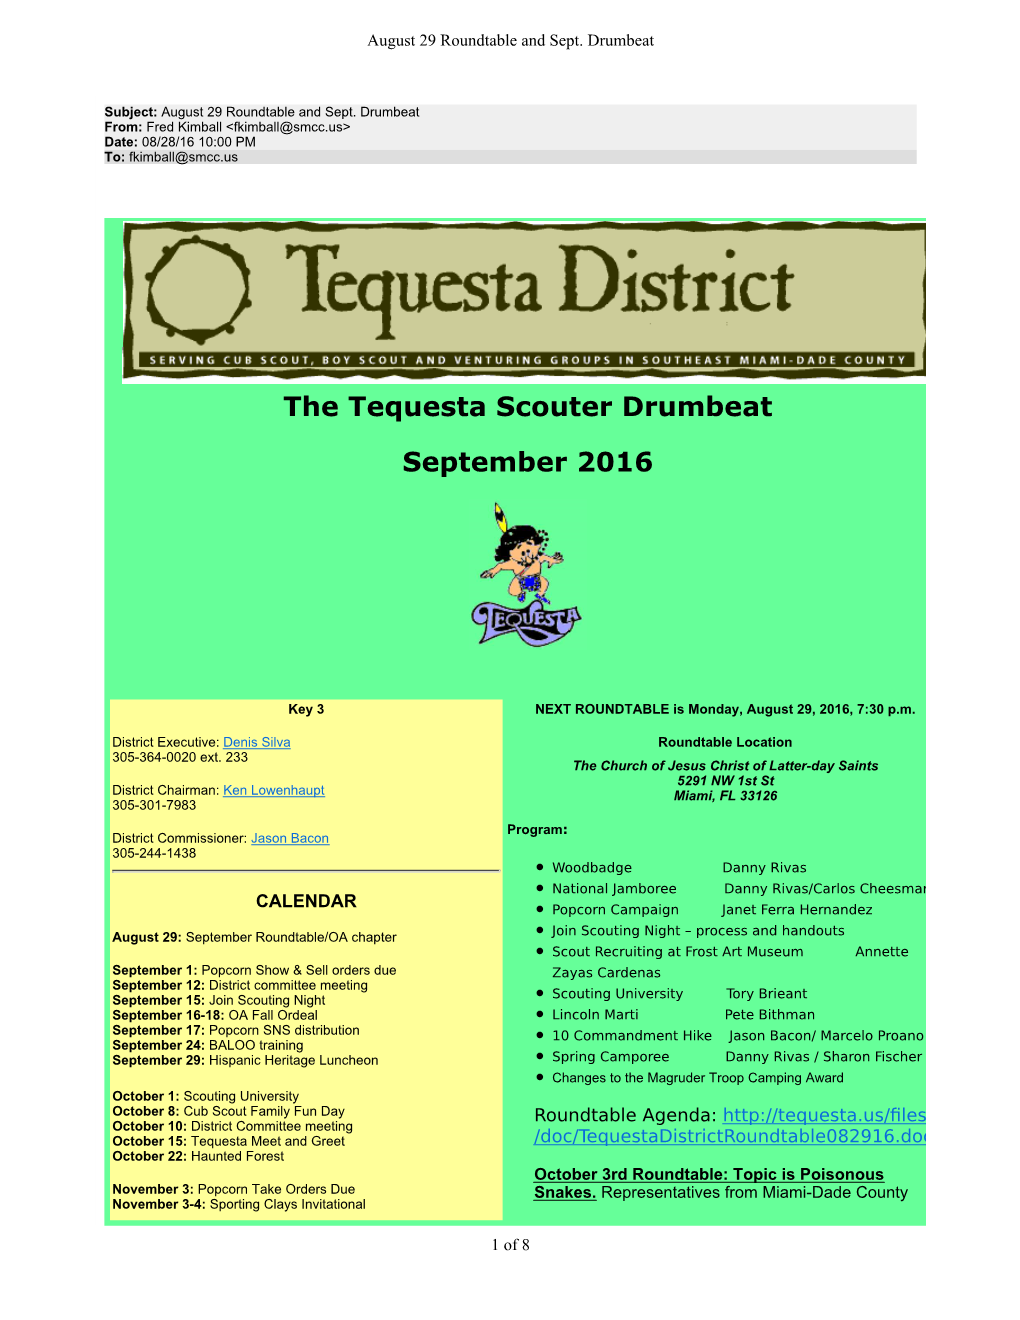 The Tequesta Scouter Drumbeat September 2016